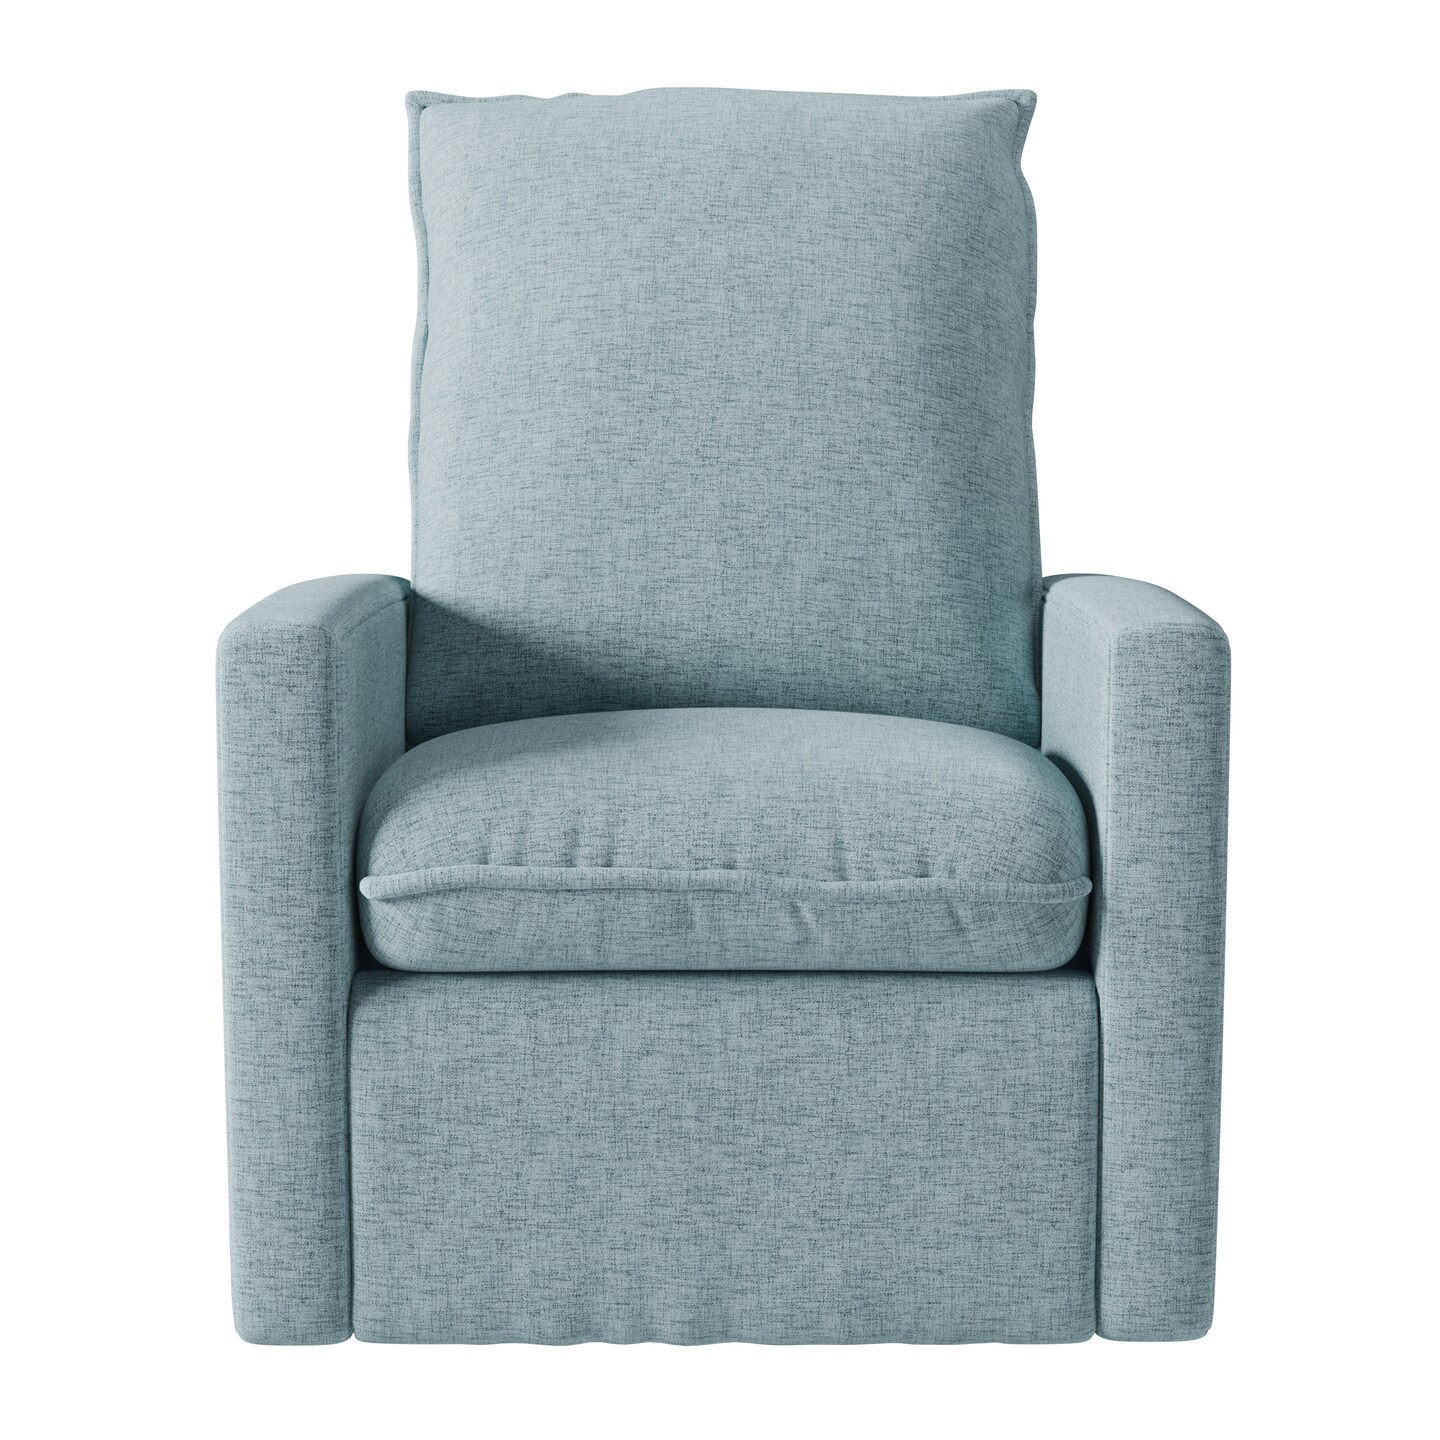 CorLiving   Blue Glider Reclining Chair